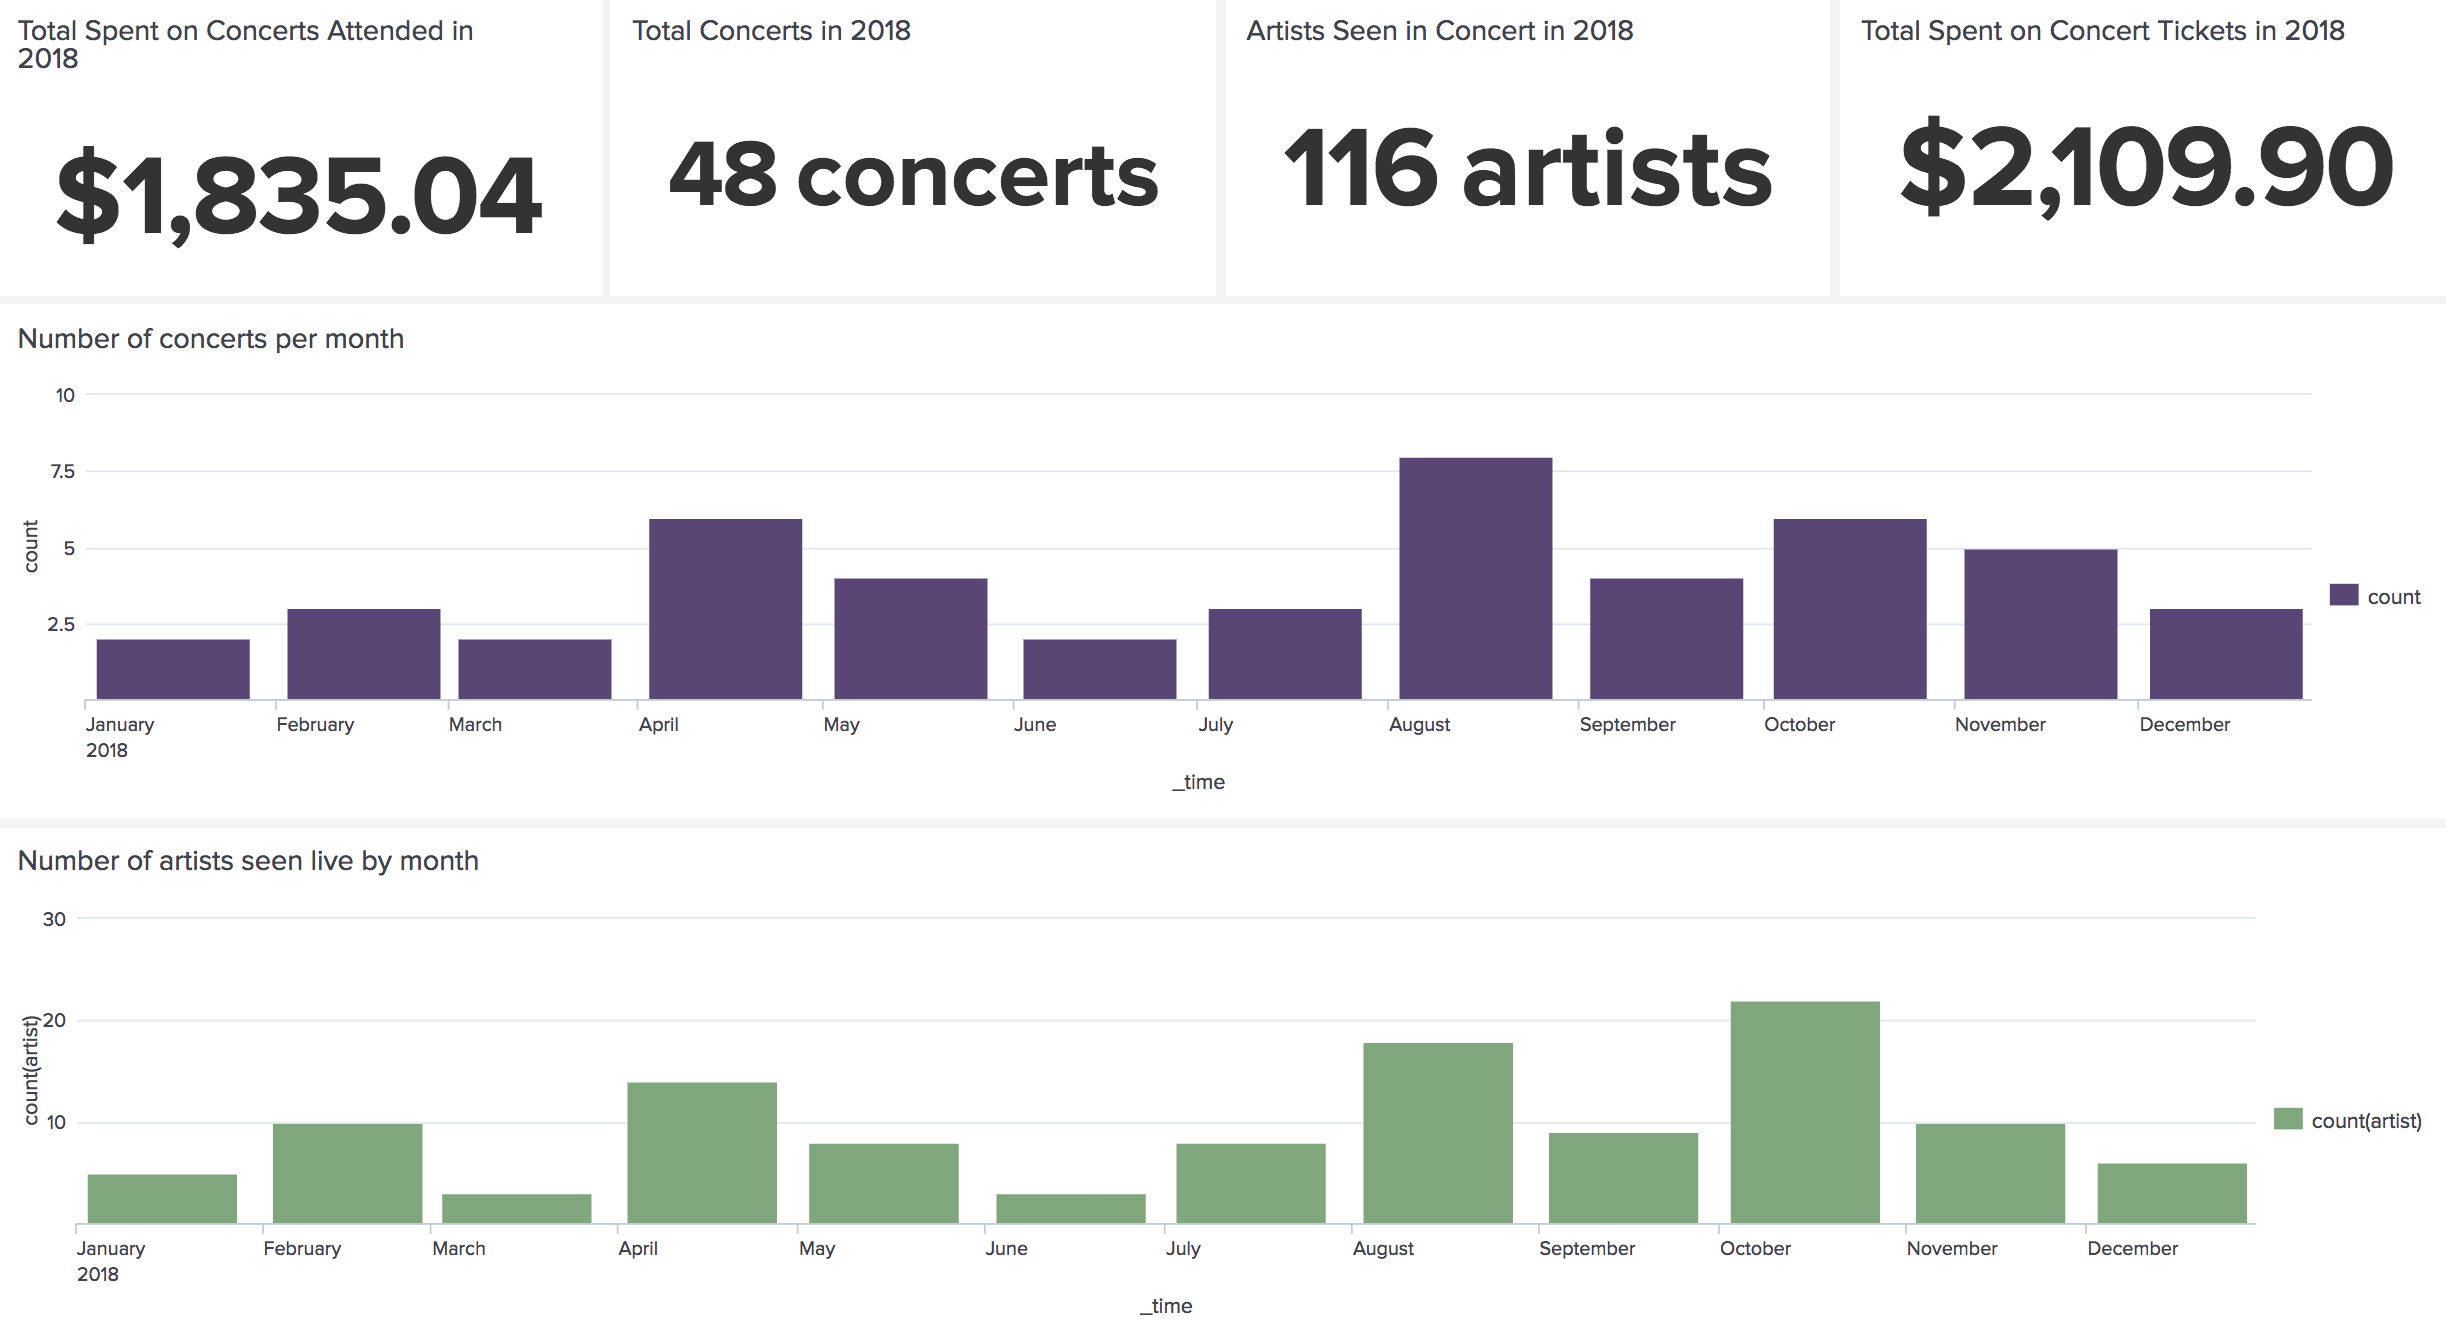 Screen capture of 4 single value data points, followed by 2 bar charts. Single value data points are total spent on concerts attended in 2018 ($1835.04), total concerts in 2018 (48), artists seen in concert in 2018 (116 artists), and total spent on concert tickets in 2018 ($2109). The first bar chart shows the number of concerts attended per month, 2 in January, 3 in February, 2 in March, 6 in April, 4 in May, 2 in June, 3 in July, 8 in August, 4 in September, 6 in October, 5 in November, and 3 so far in December. The last bar chart is the number of artists seen by month: 5 in Jan, 10 in Feb, 3 in March, 14 in April, 8 in May, 3 in June, 8 in July, 18 in August, 9 in Sep, 22 in Oct, 10 in Nov, 6 in December.